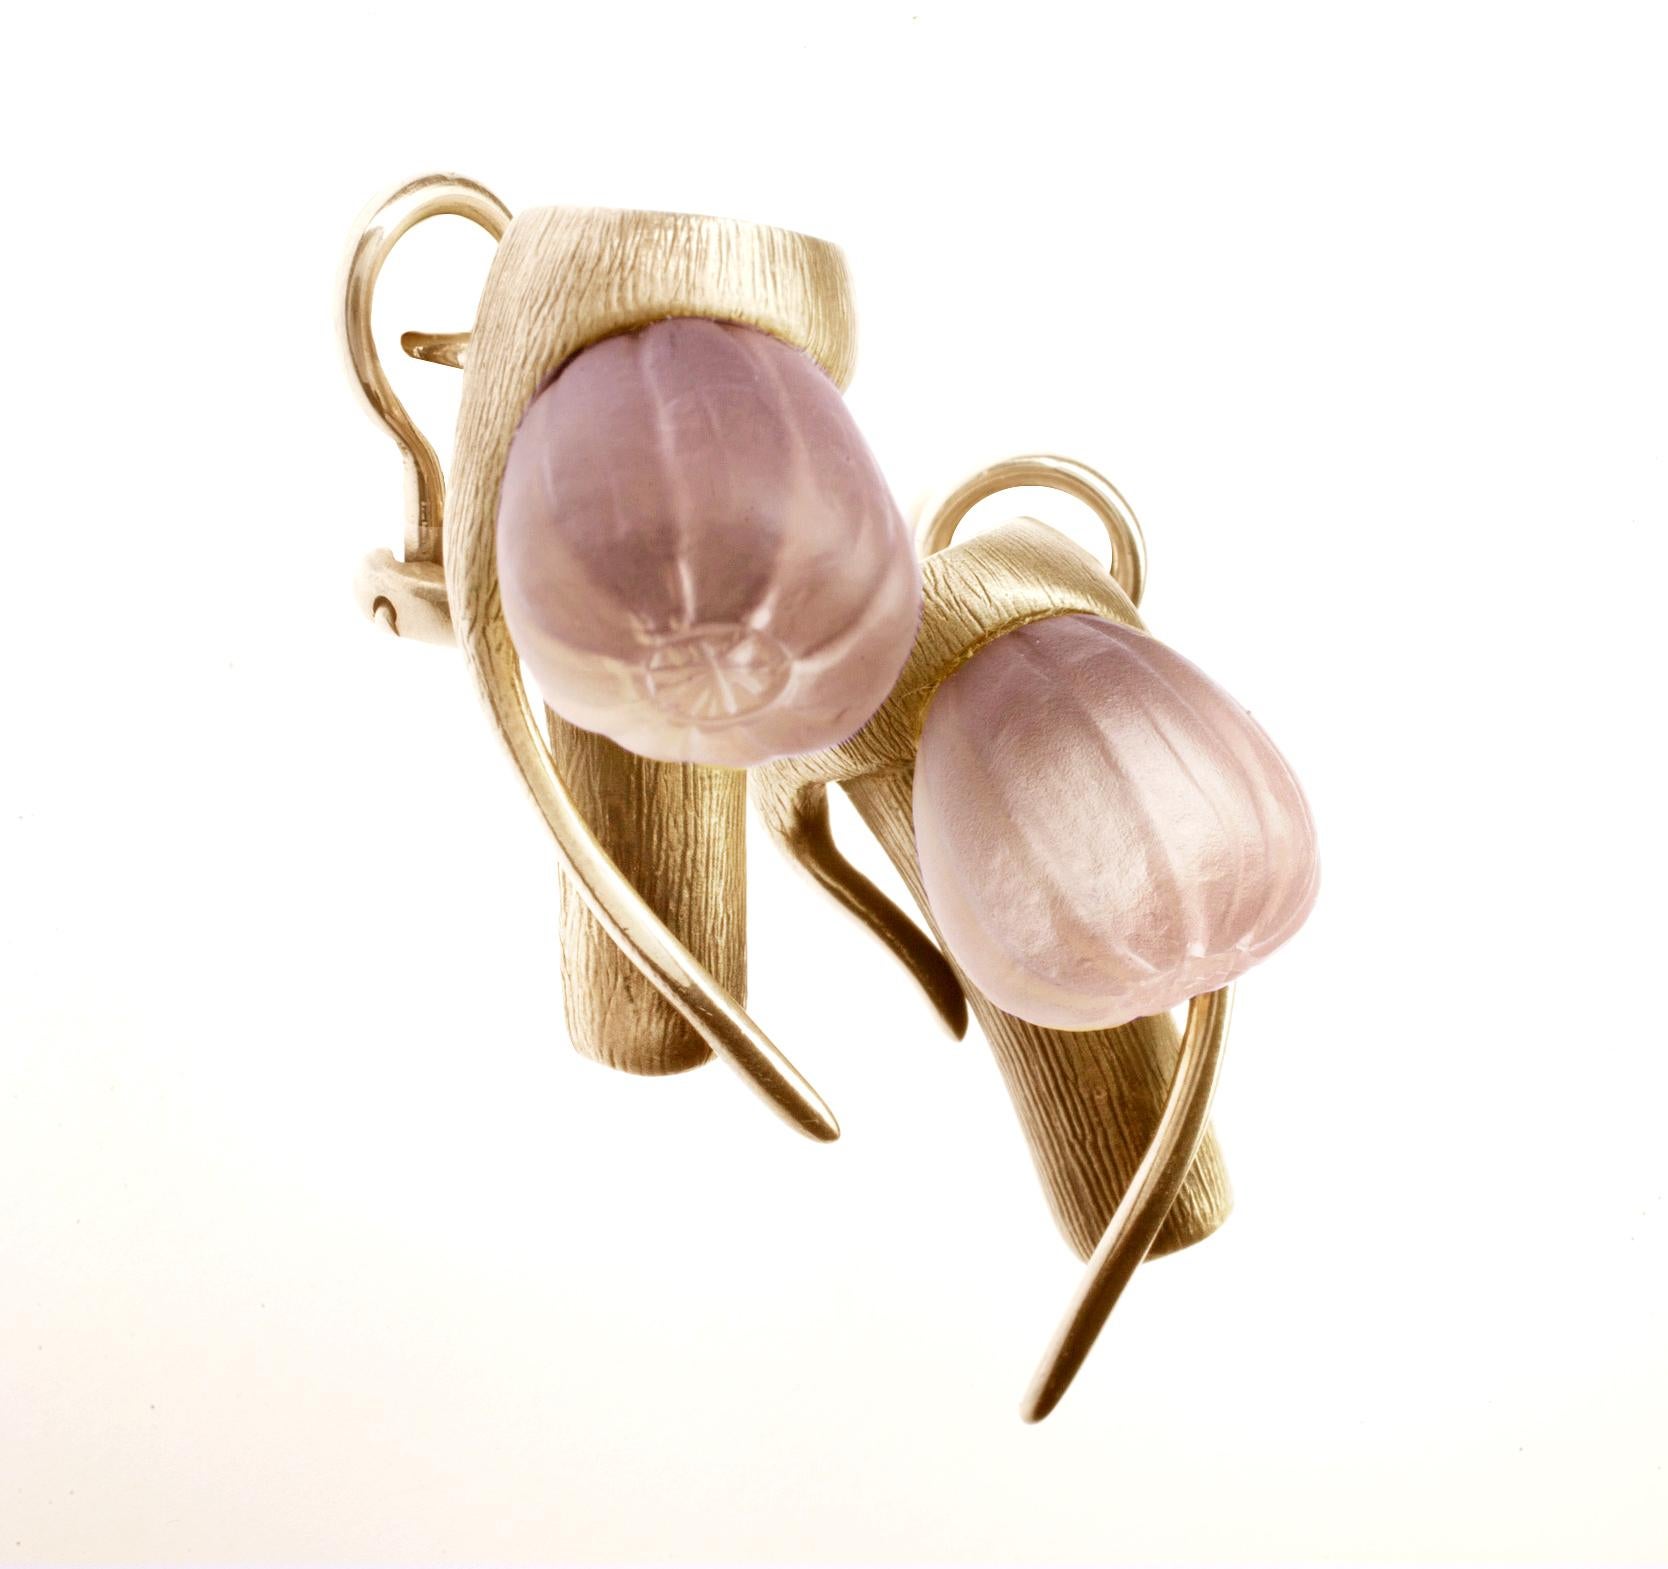 These contemporary Fig cocktail earrings are made of 14 karat rose gold with tender frosted rose onyx. The collection was featured in Harper's Bazaar UA editorial, published issue. The earrings were also selected by actress Anne Ratte-Polle to be